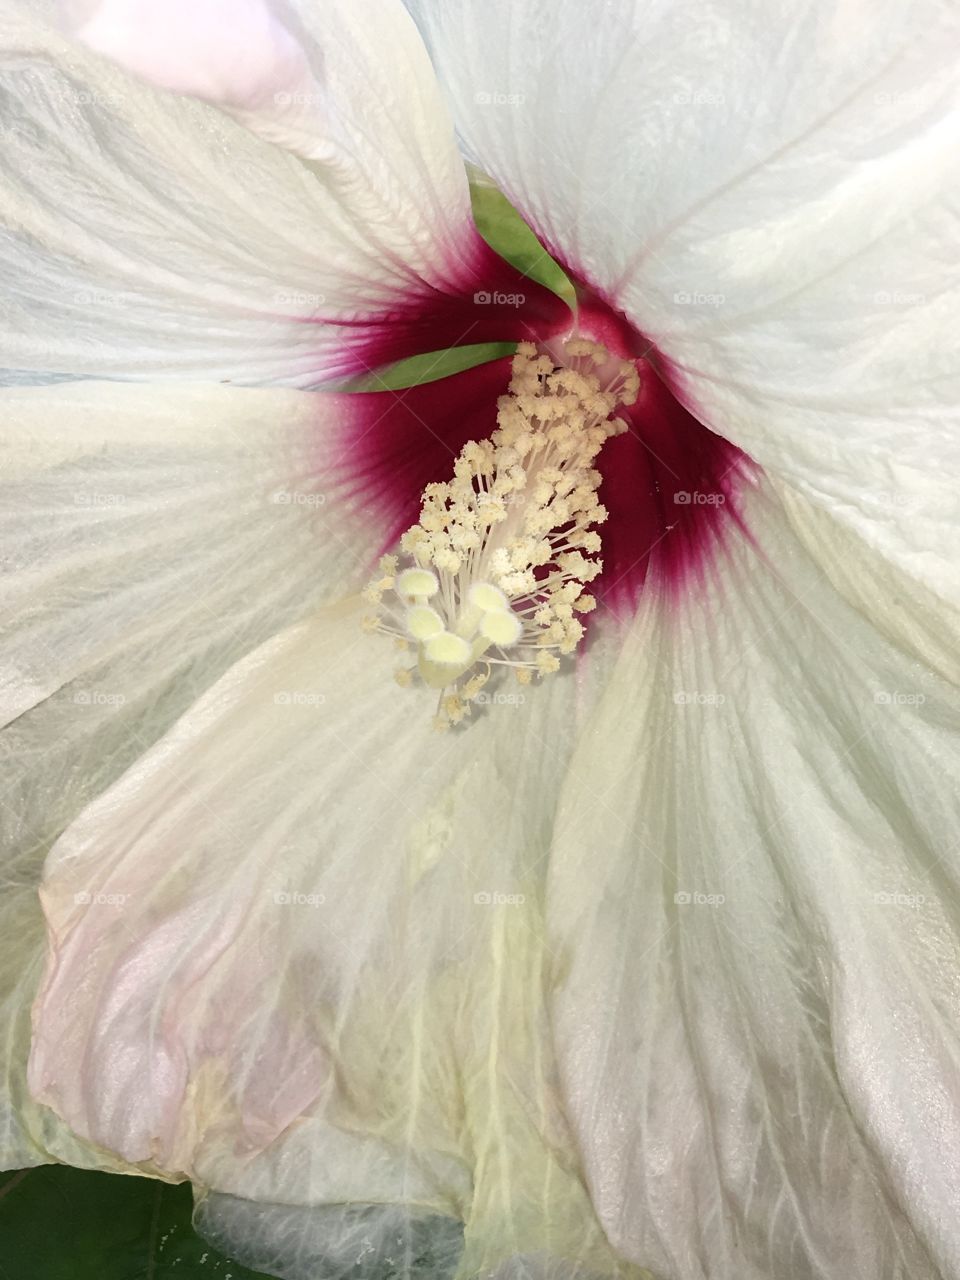 Hardy White Hibiscus with Fuchsia Center!
Perennial plant for growing in northern states.